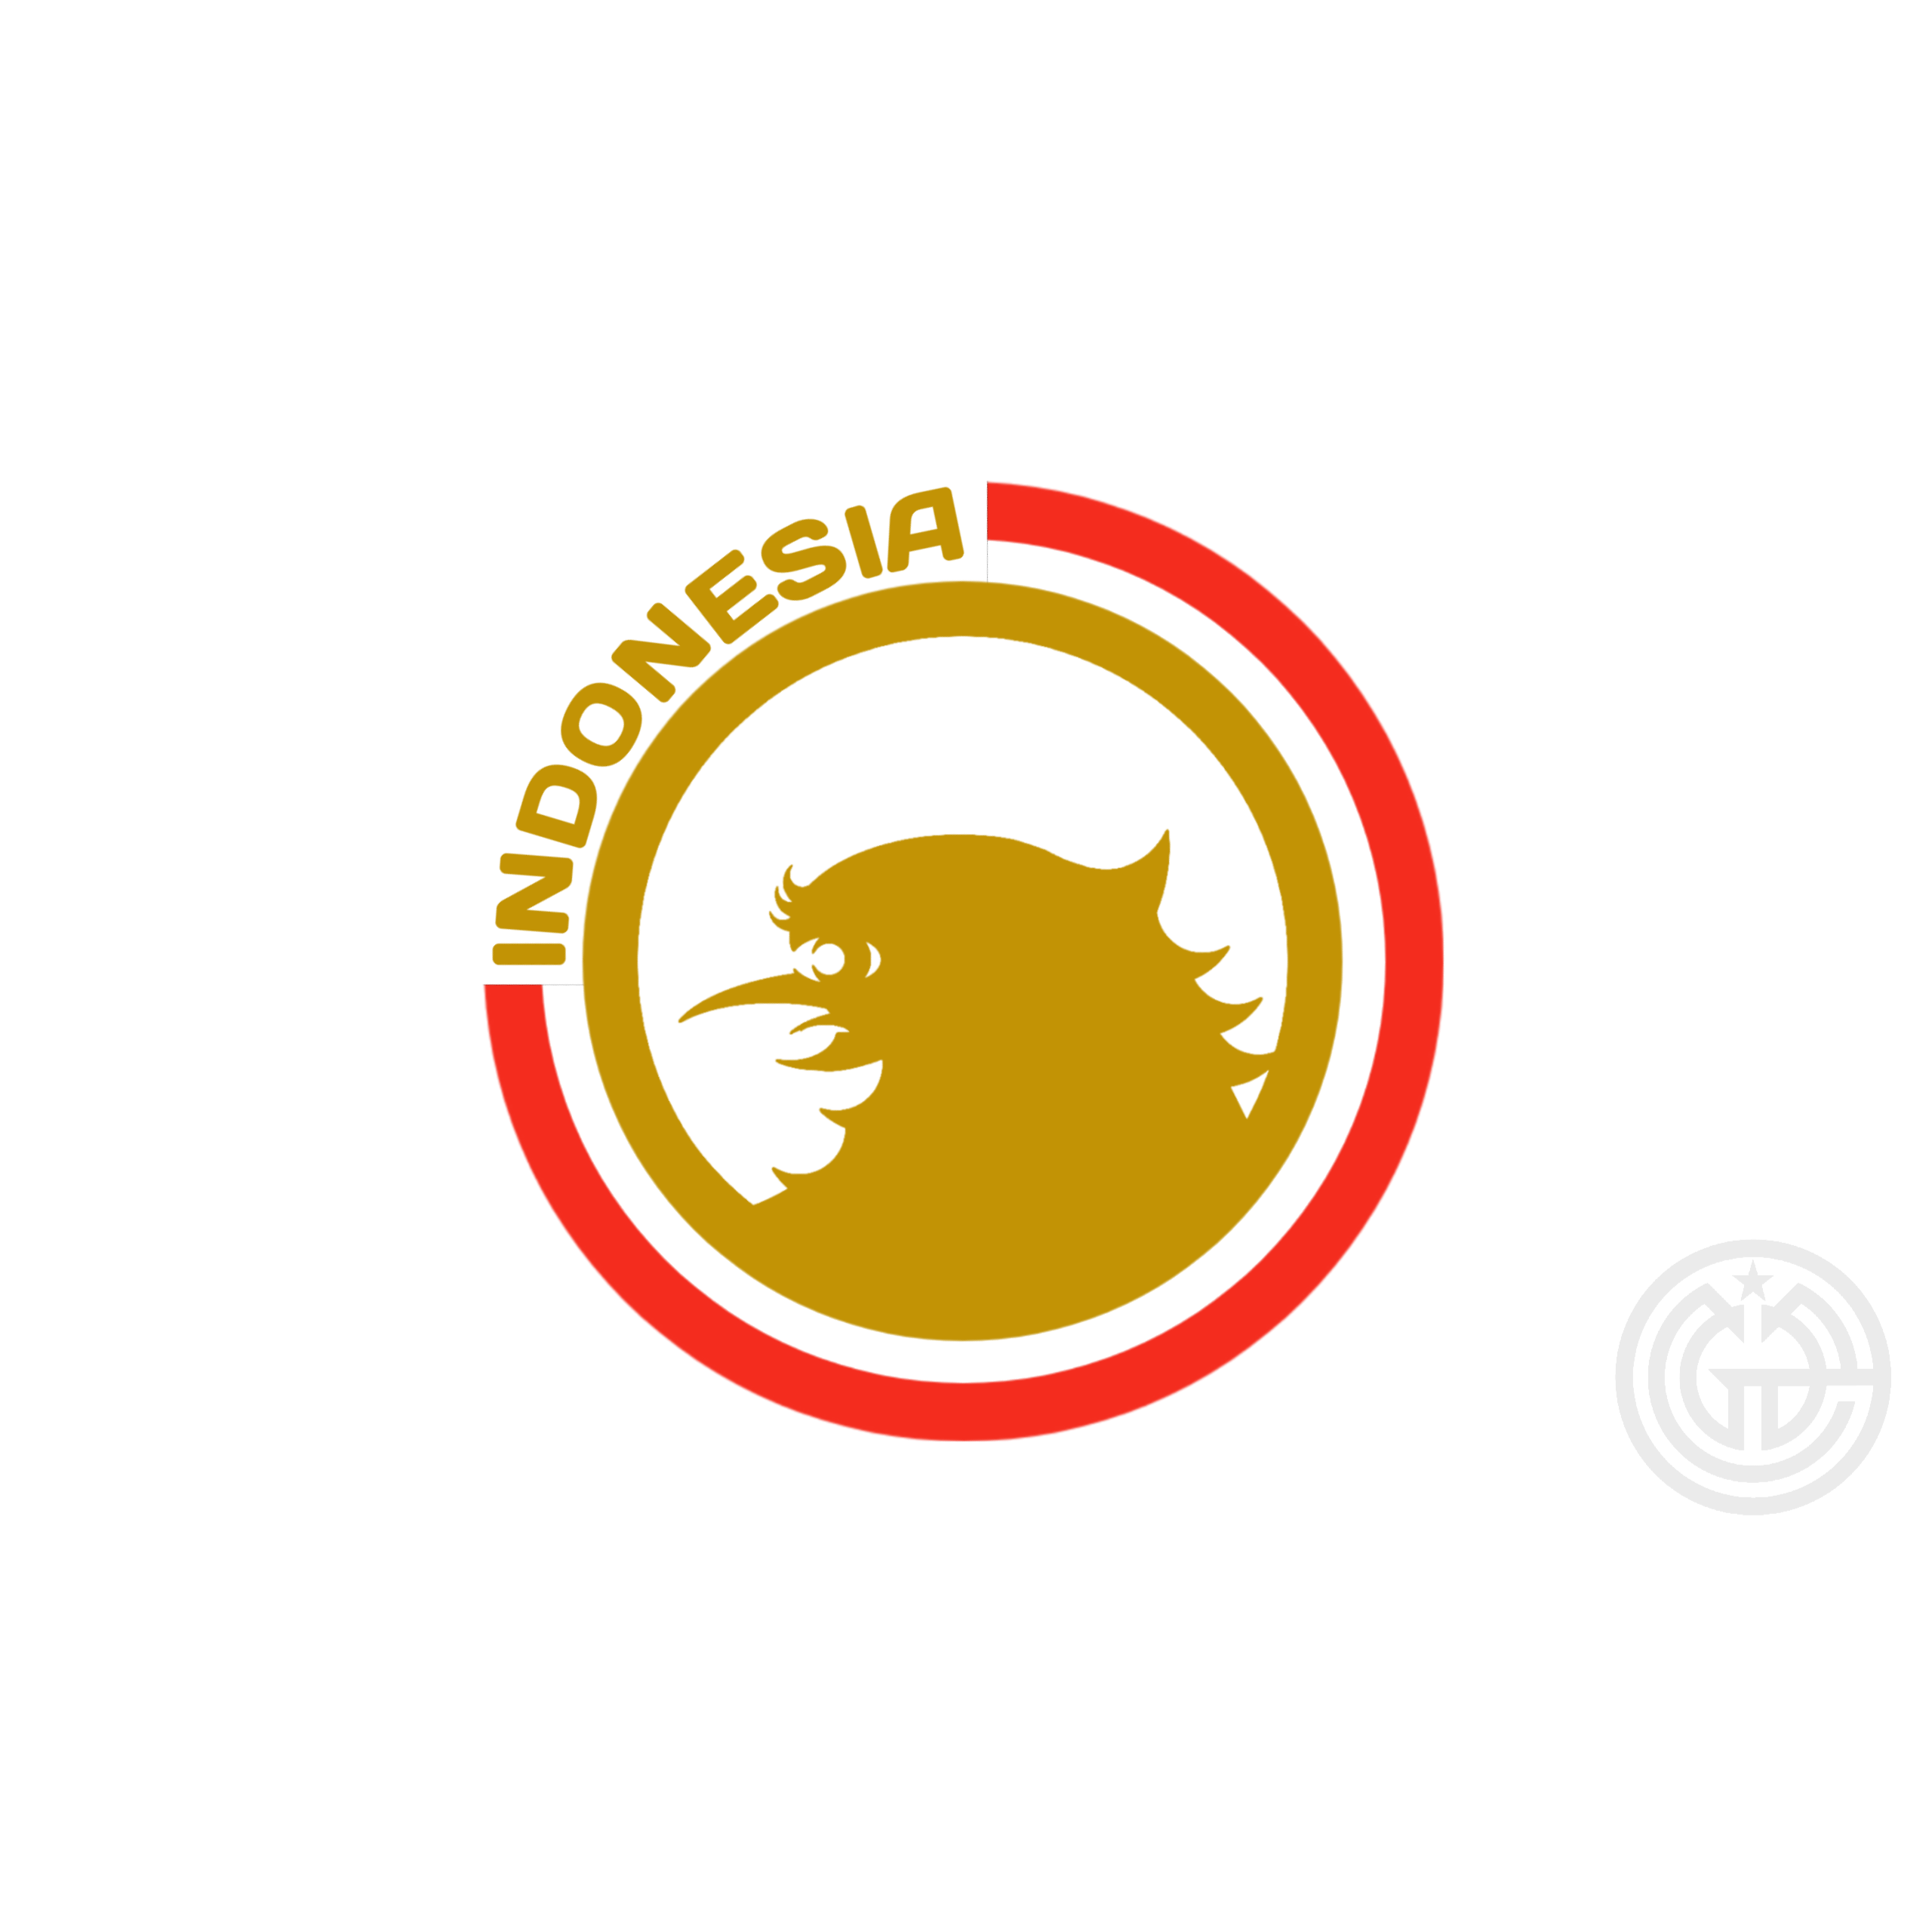 Indonesia National Football Team Wallpapers